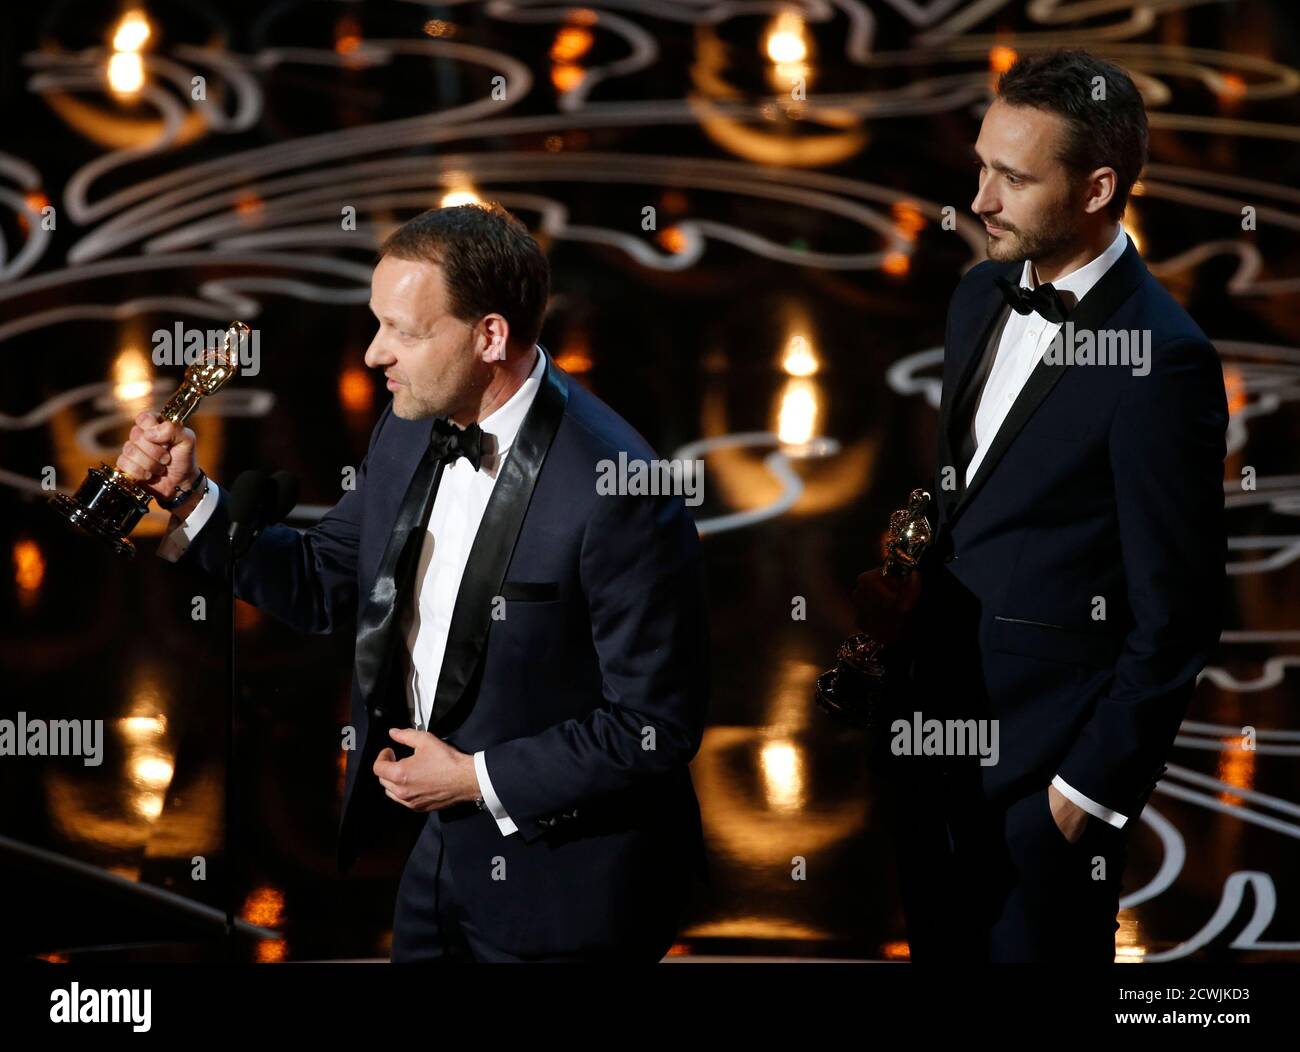 Kim Magnusson (L) and Anders Walter accept the Oscar for best live action short  film for "Helium" at the 86th Academy Awards in Hollywood, California March  2, 2014. REUTERS/Lucy Nicholson (UNITED STATES -